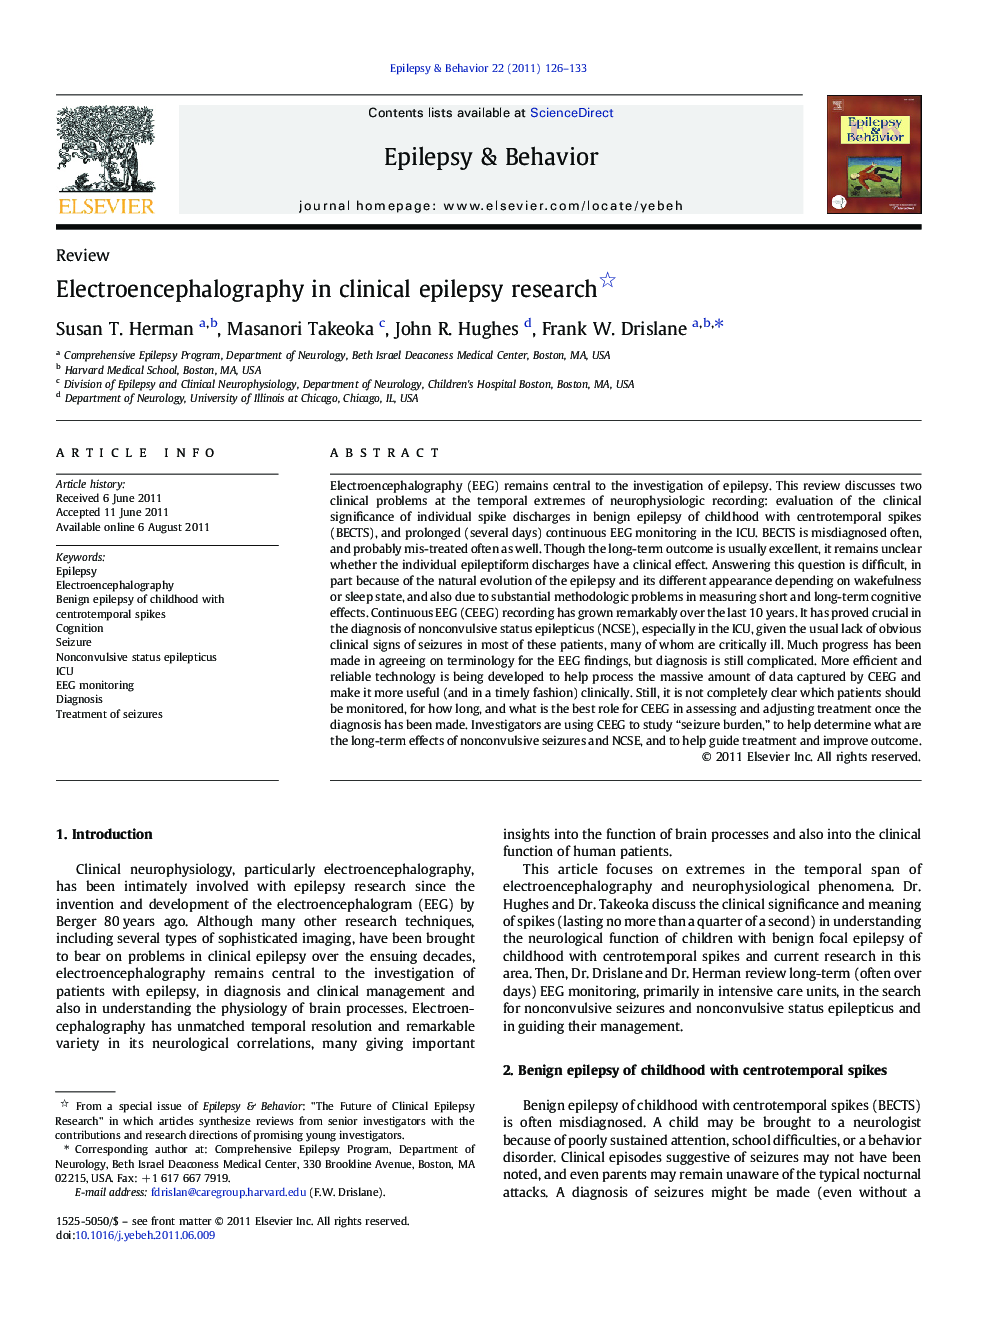 Electroencephalography in clinical epilepsy research 